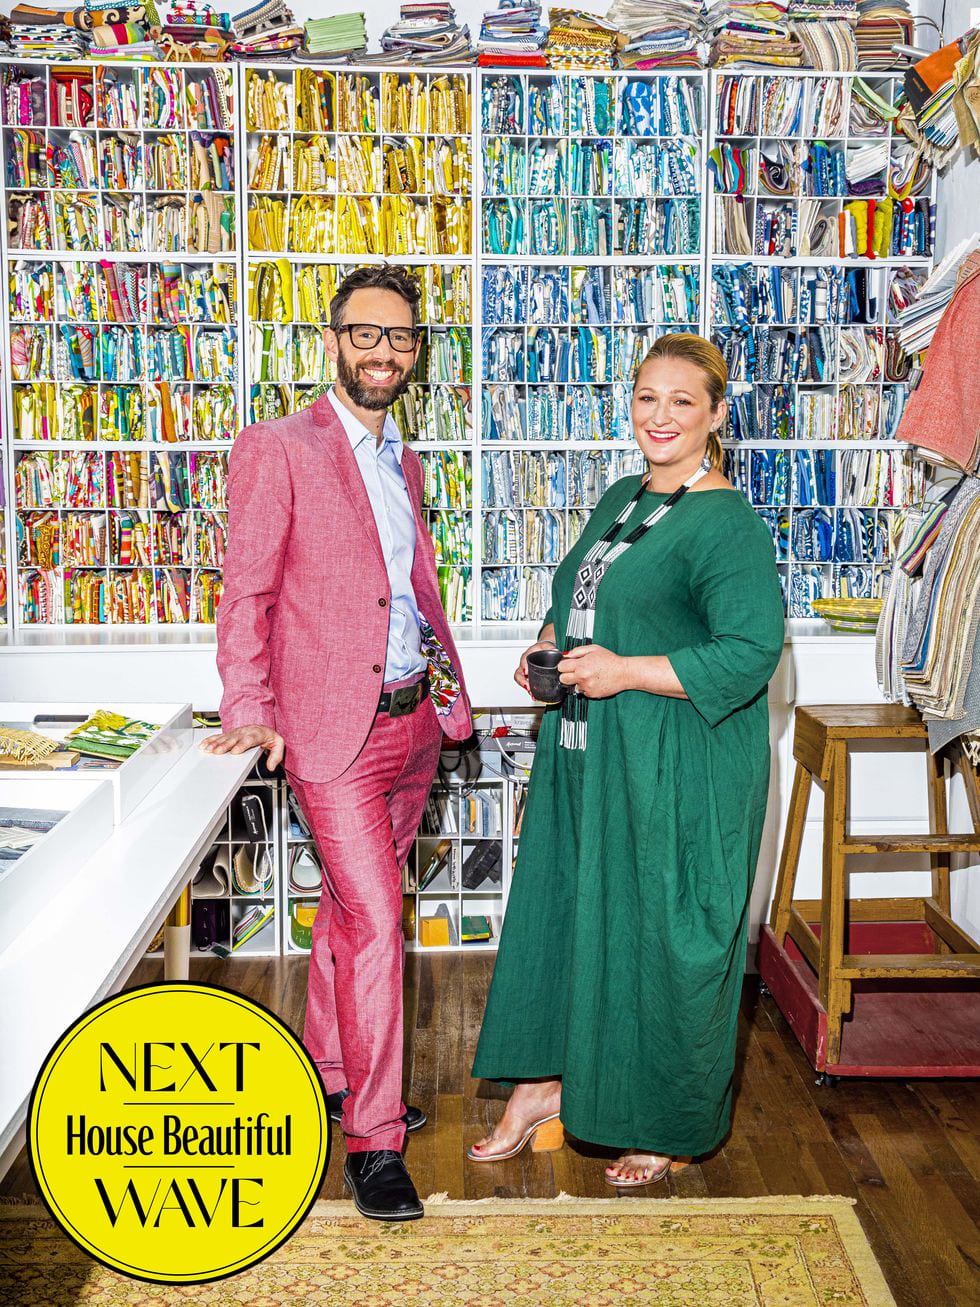 Matt and Heather French posing in front of wall of shelves filled with rainbow colored textiles with logo for Next Wave House Beatiful